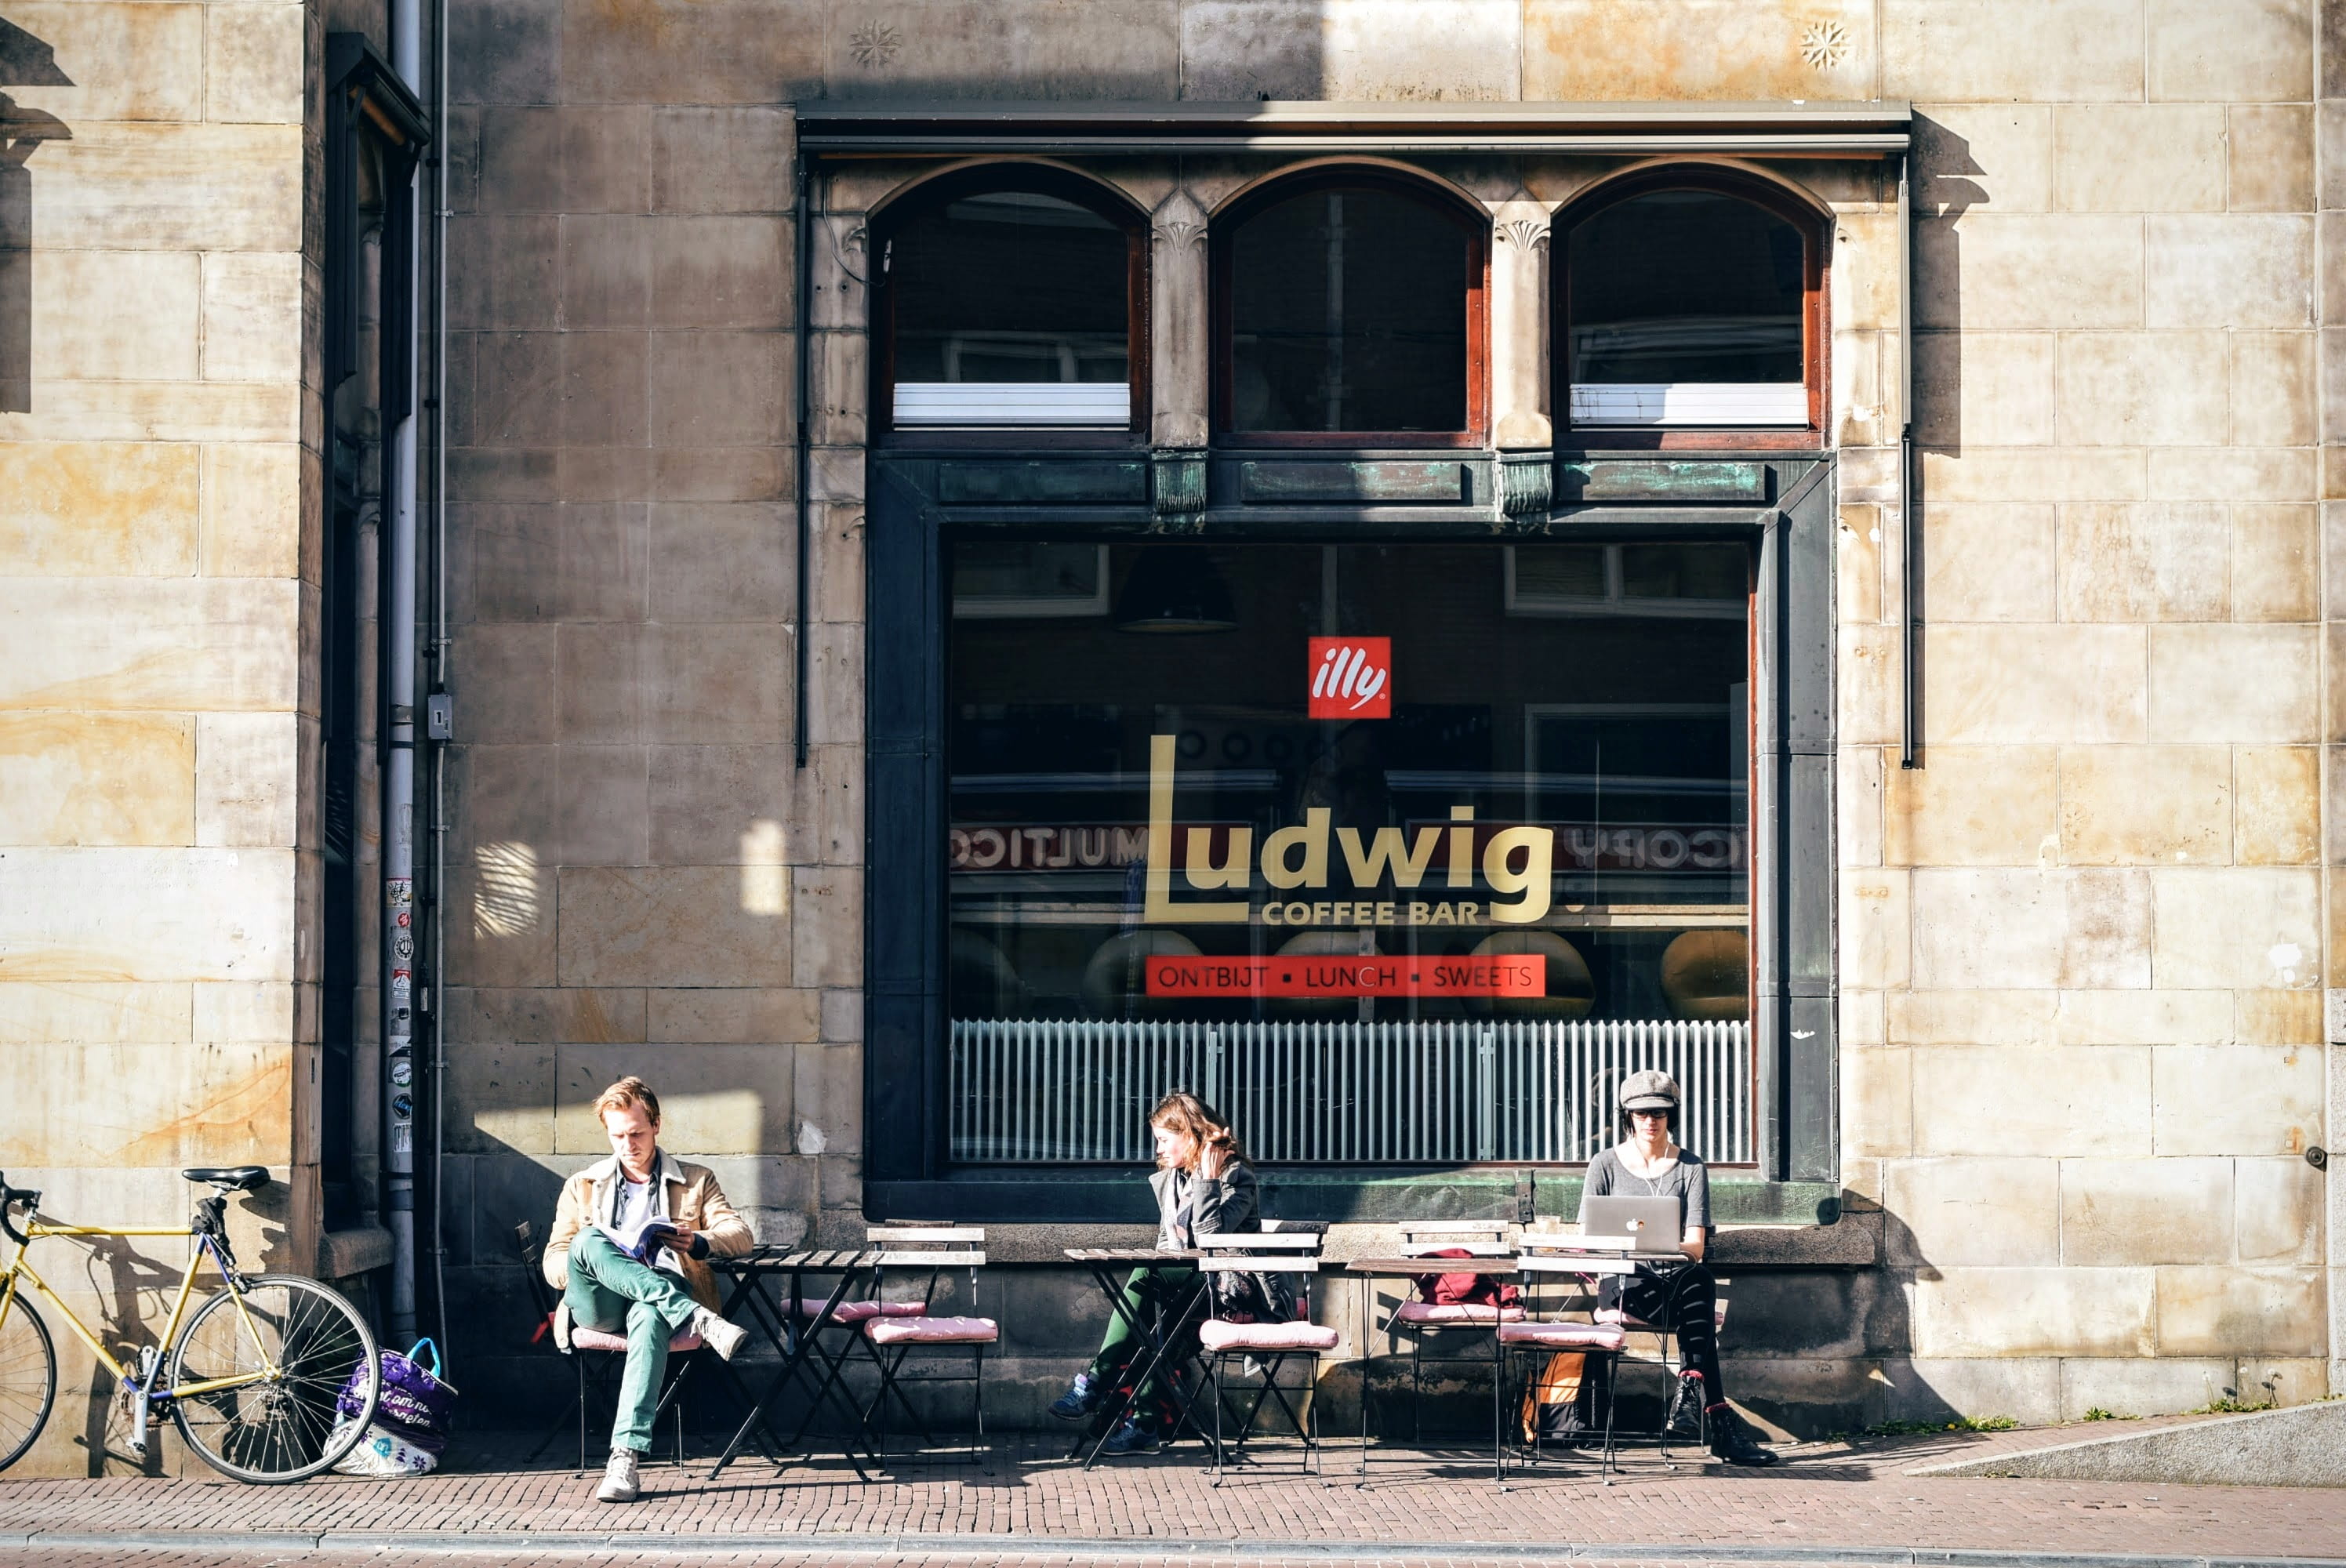 photo of three people sitting in front of Ludwig coffee, architecture